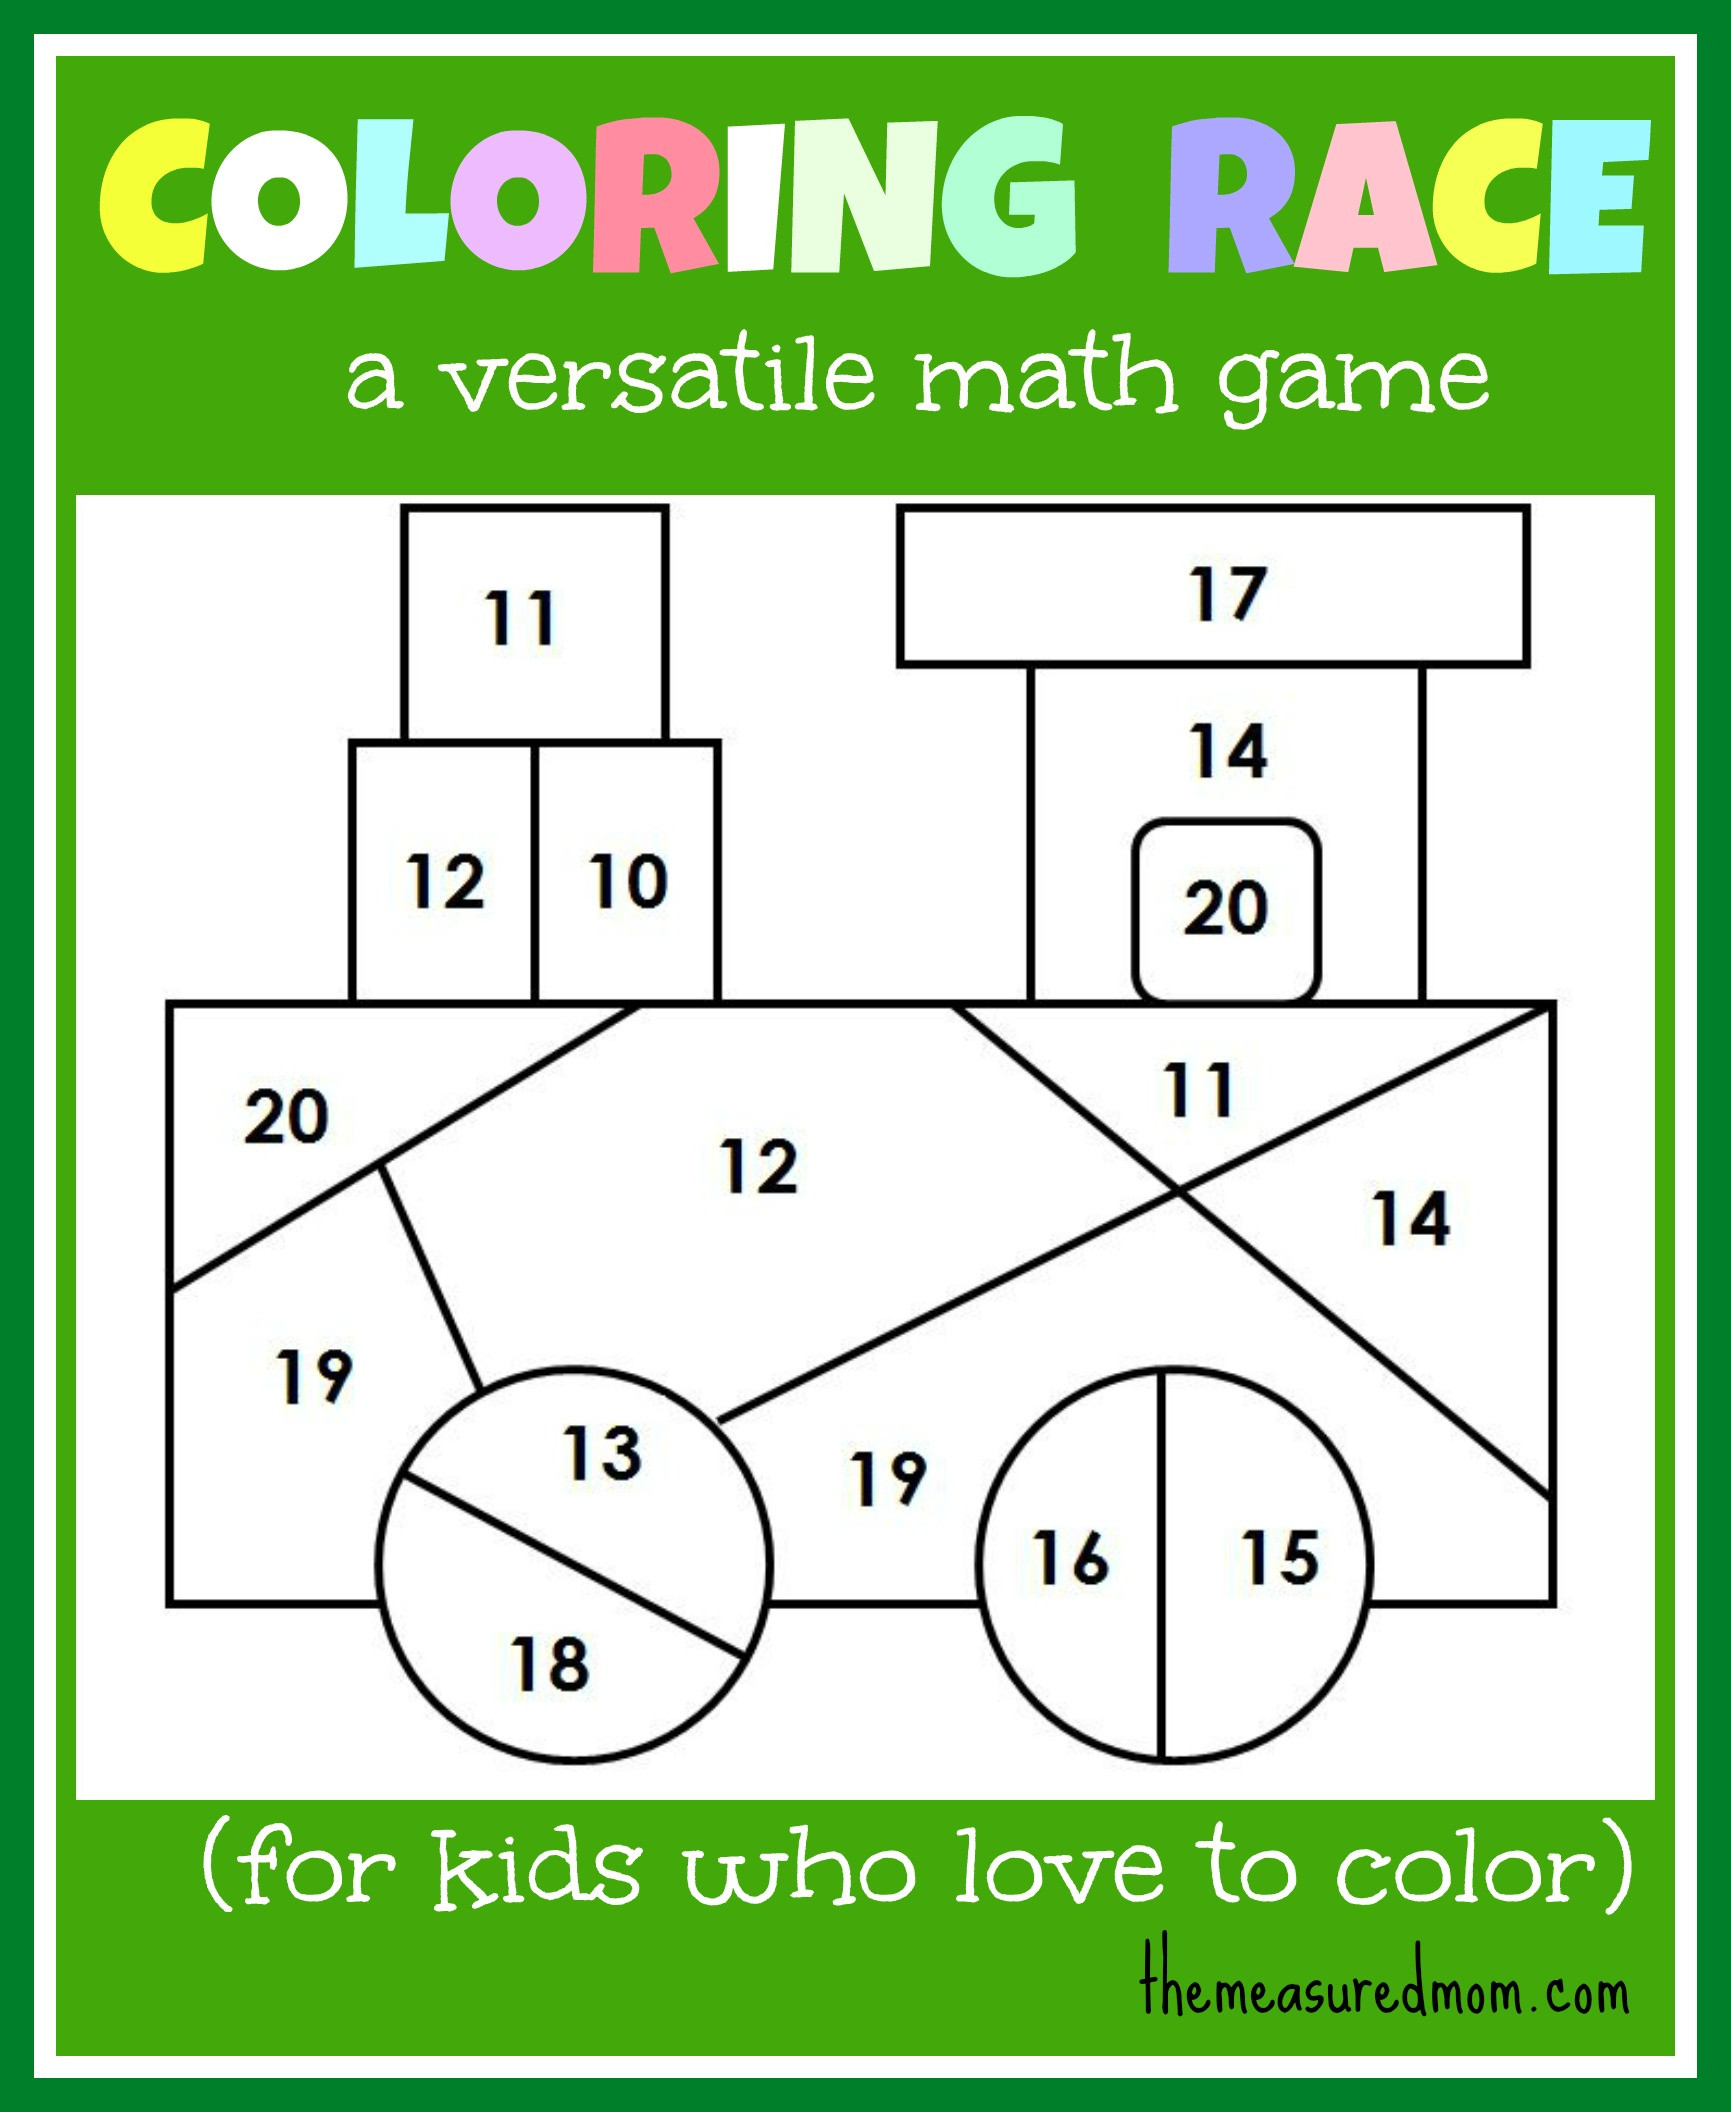 Coloring Game For Children
 Math game for kids Coloring Race bines math and